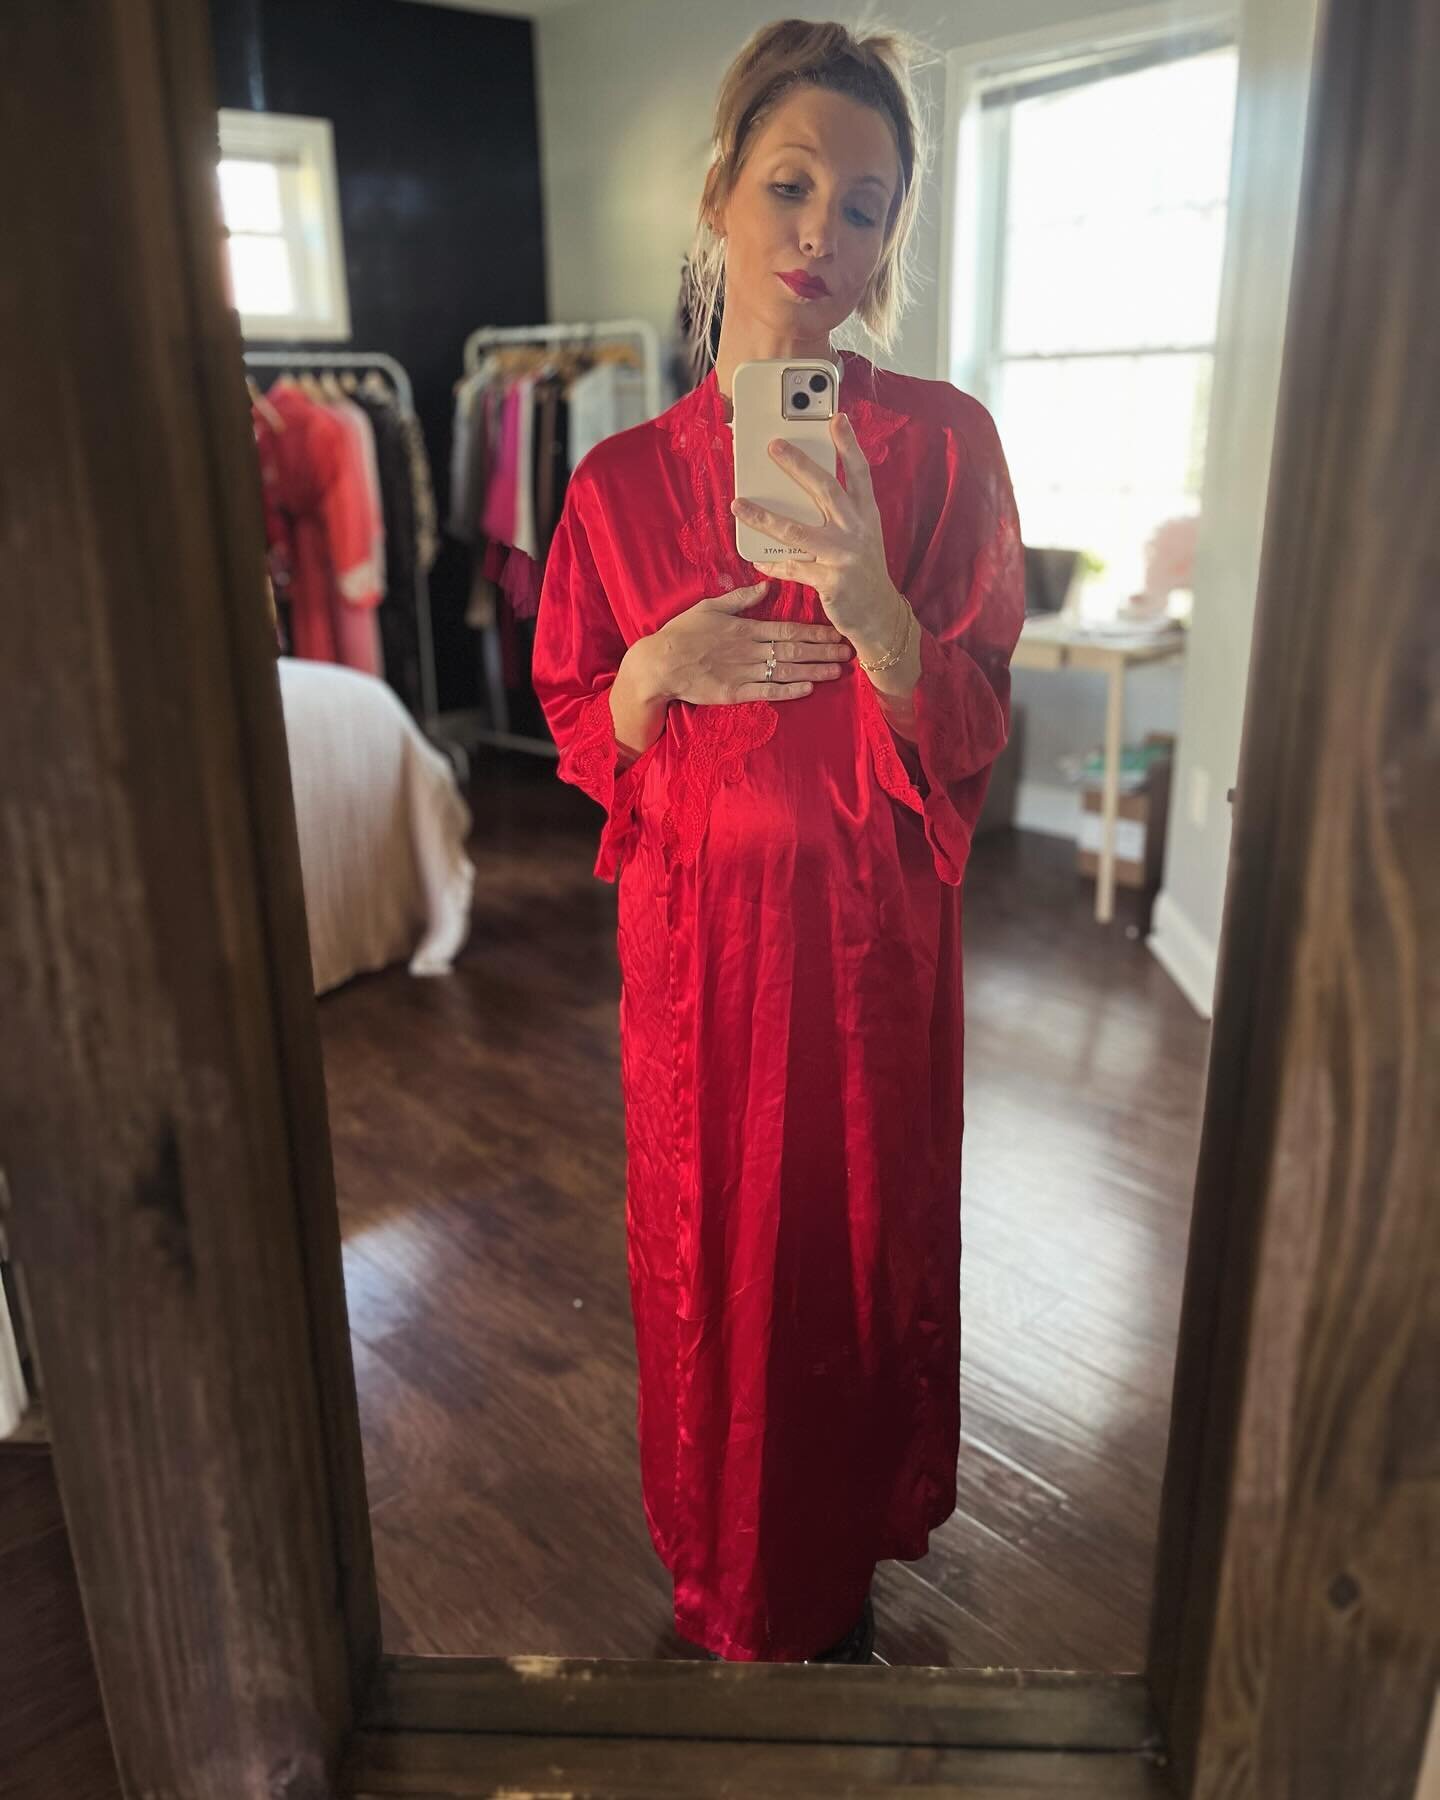 Kimono or dressing gown. You decide. 

This is a sneak peak of the VALT Valentines drop via our VALT Vintage collection. 

DM me for an in-person try-on sesh!

Xo, Ashley 💋